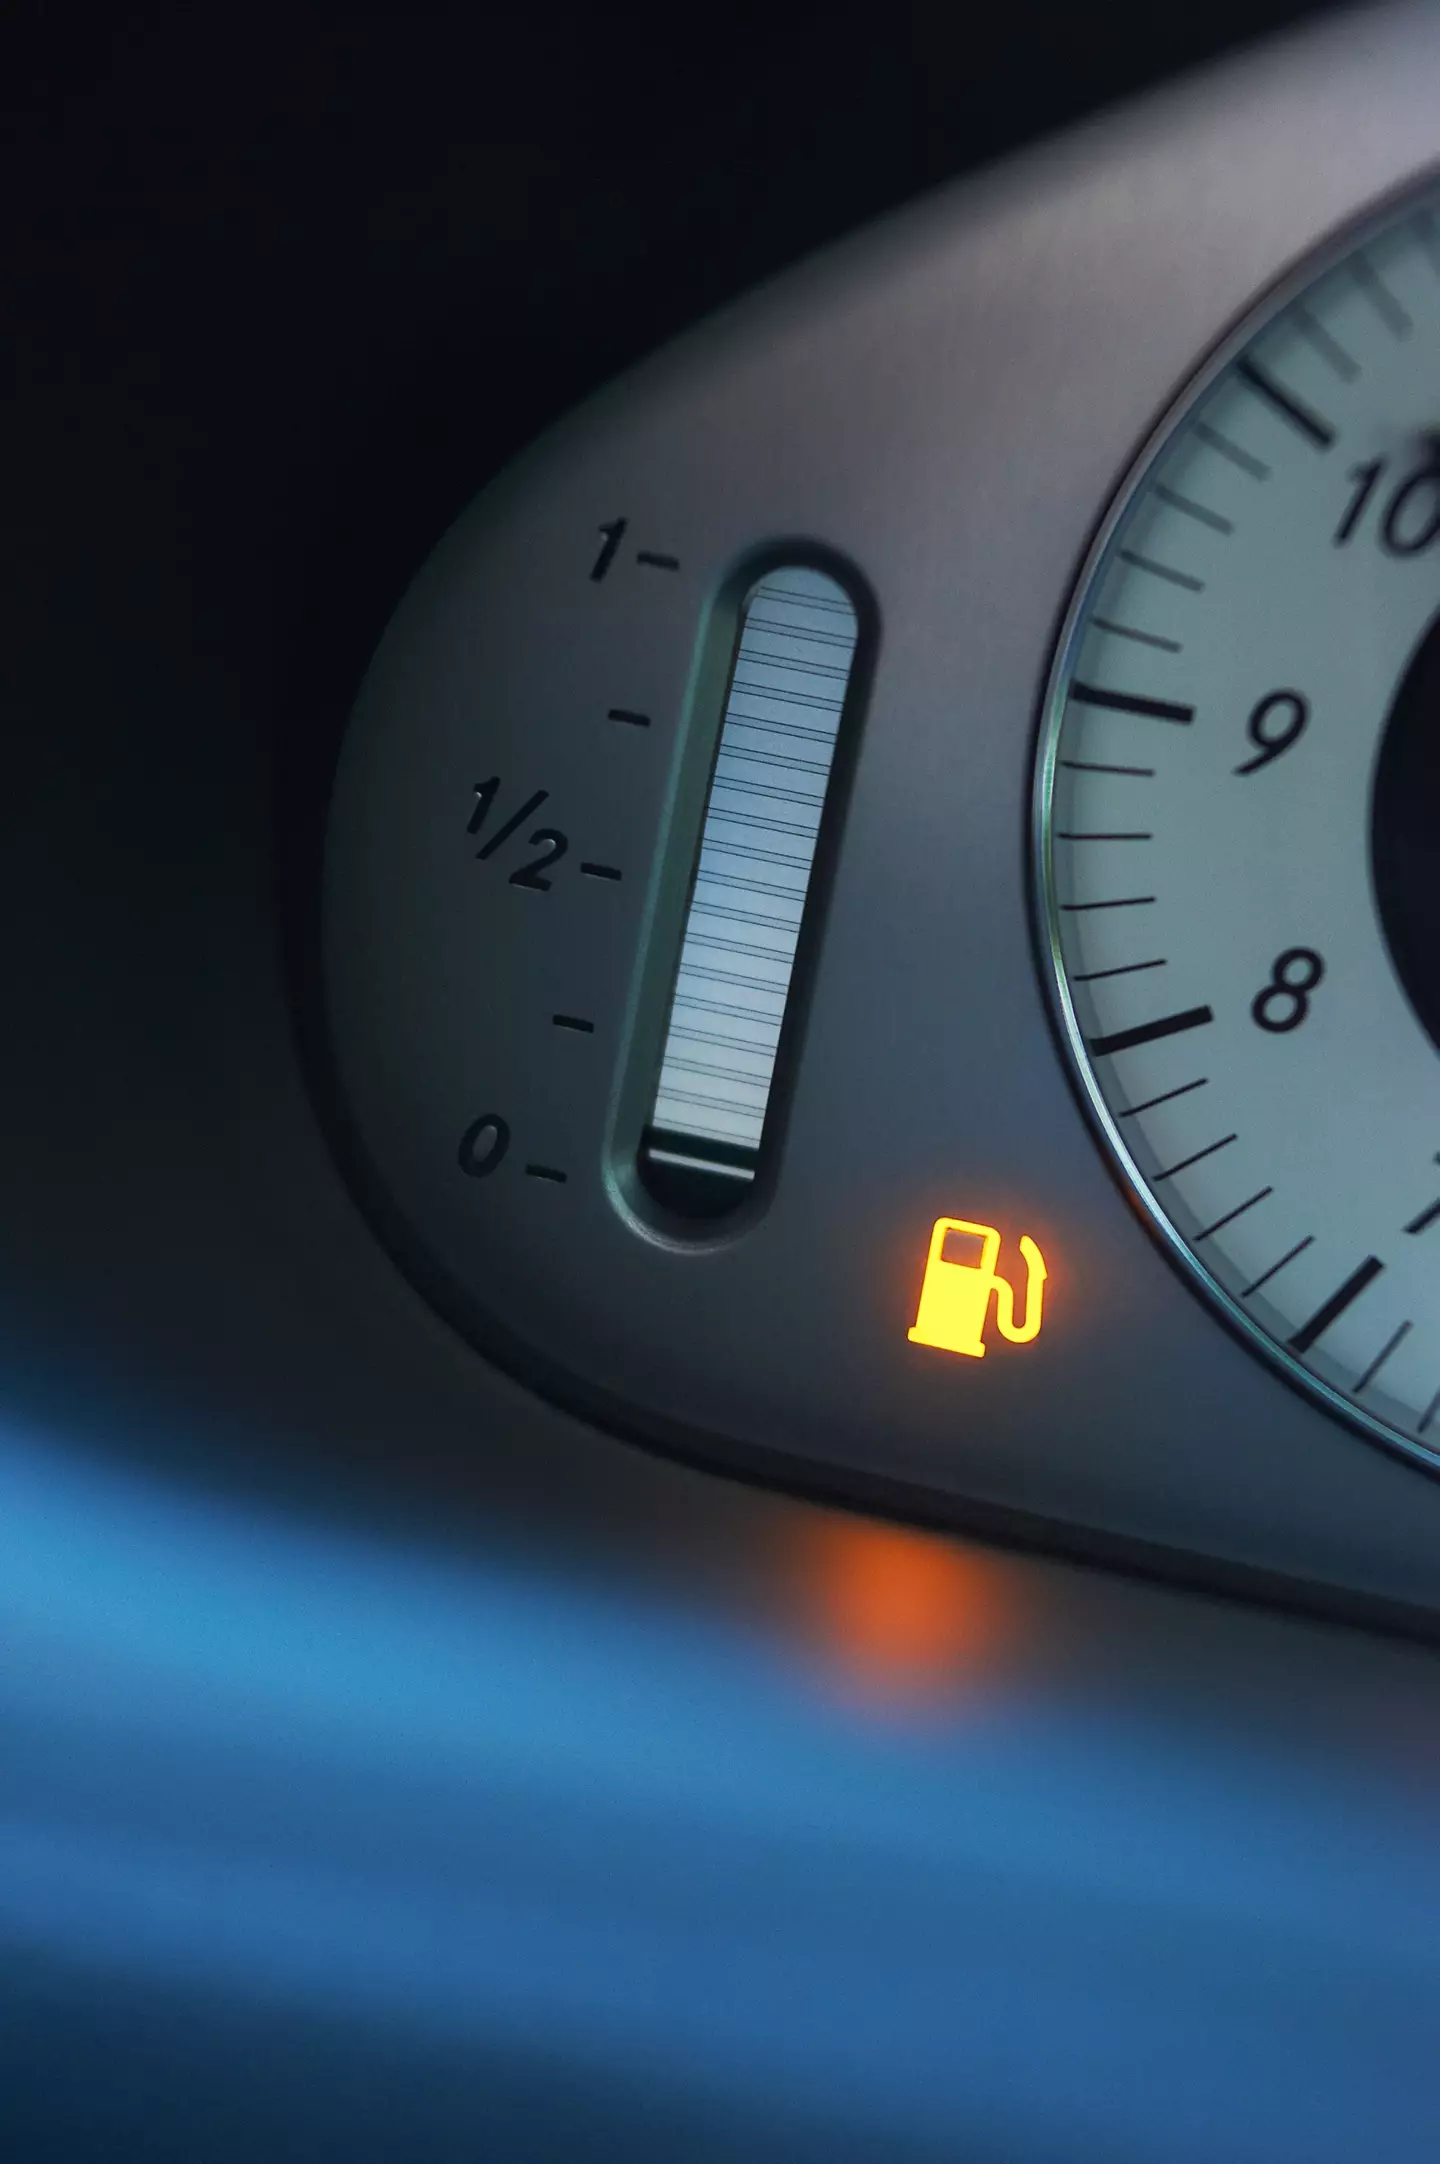 The dreaded petrol light coming on instils fear in most drivers.